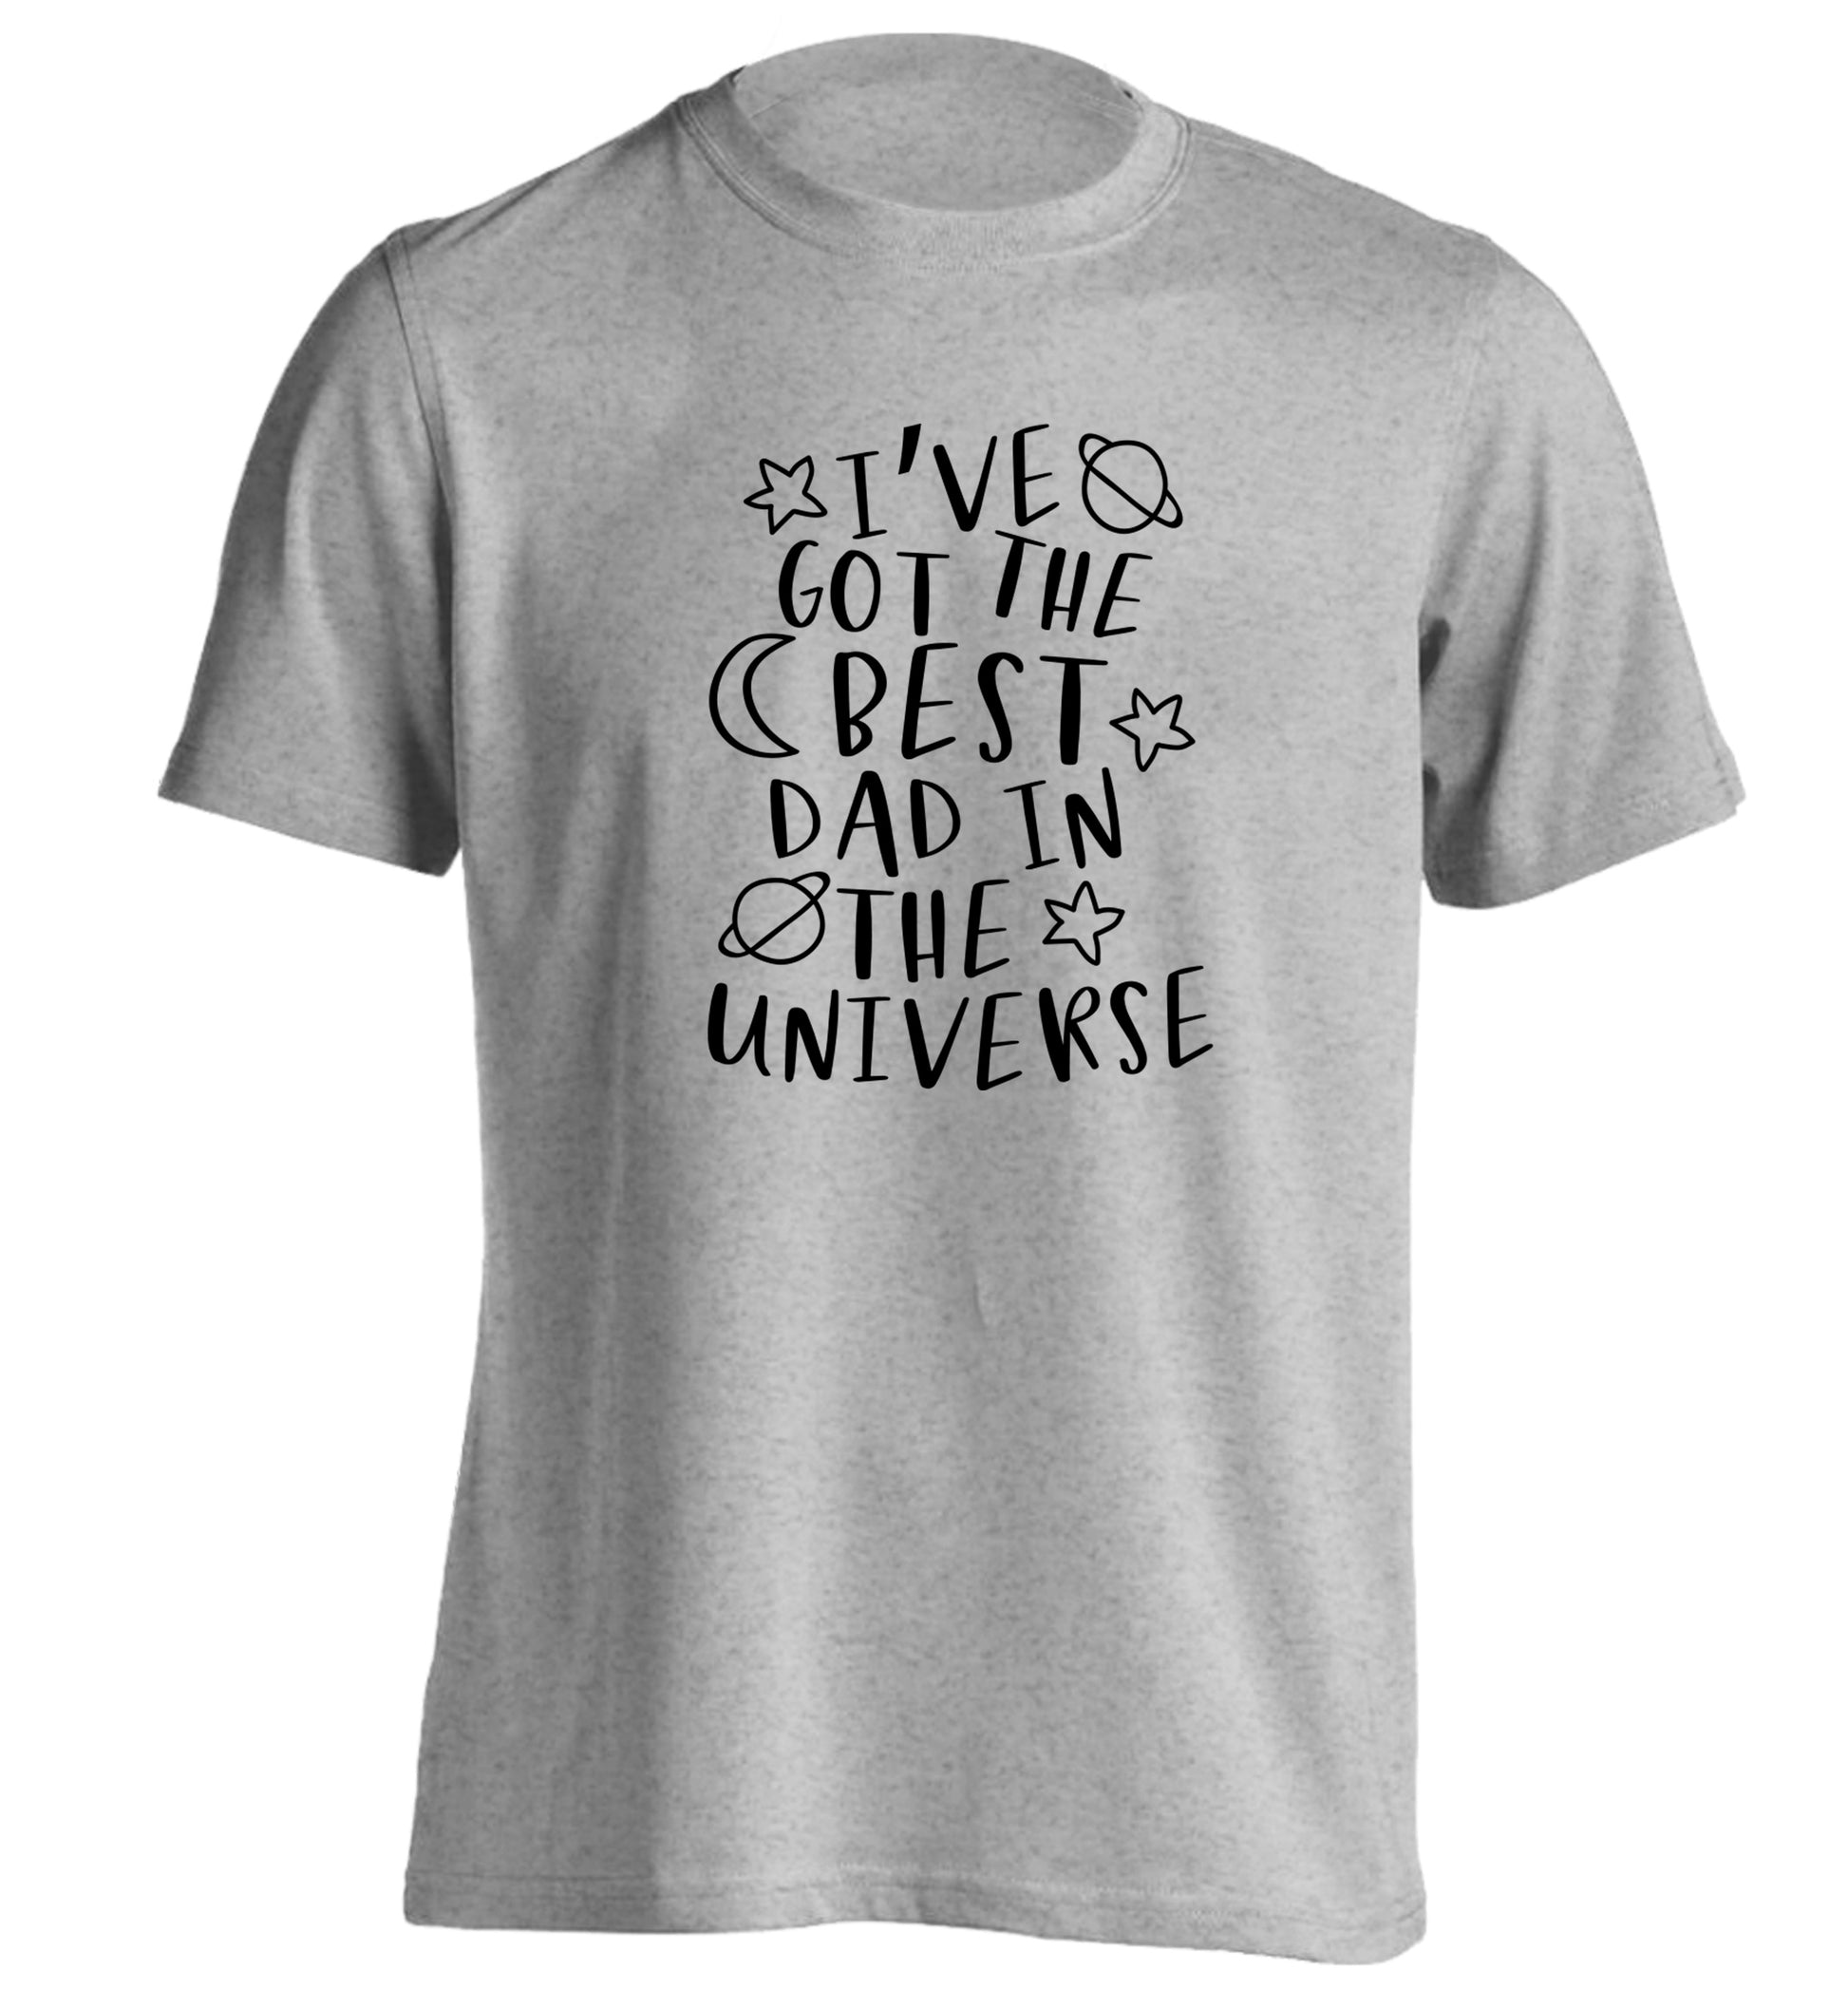 I've got the best dad in the universe adults unisex grey Tshirt 2XL